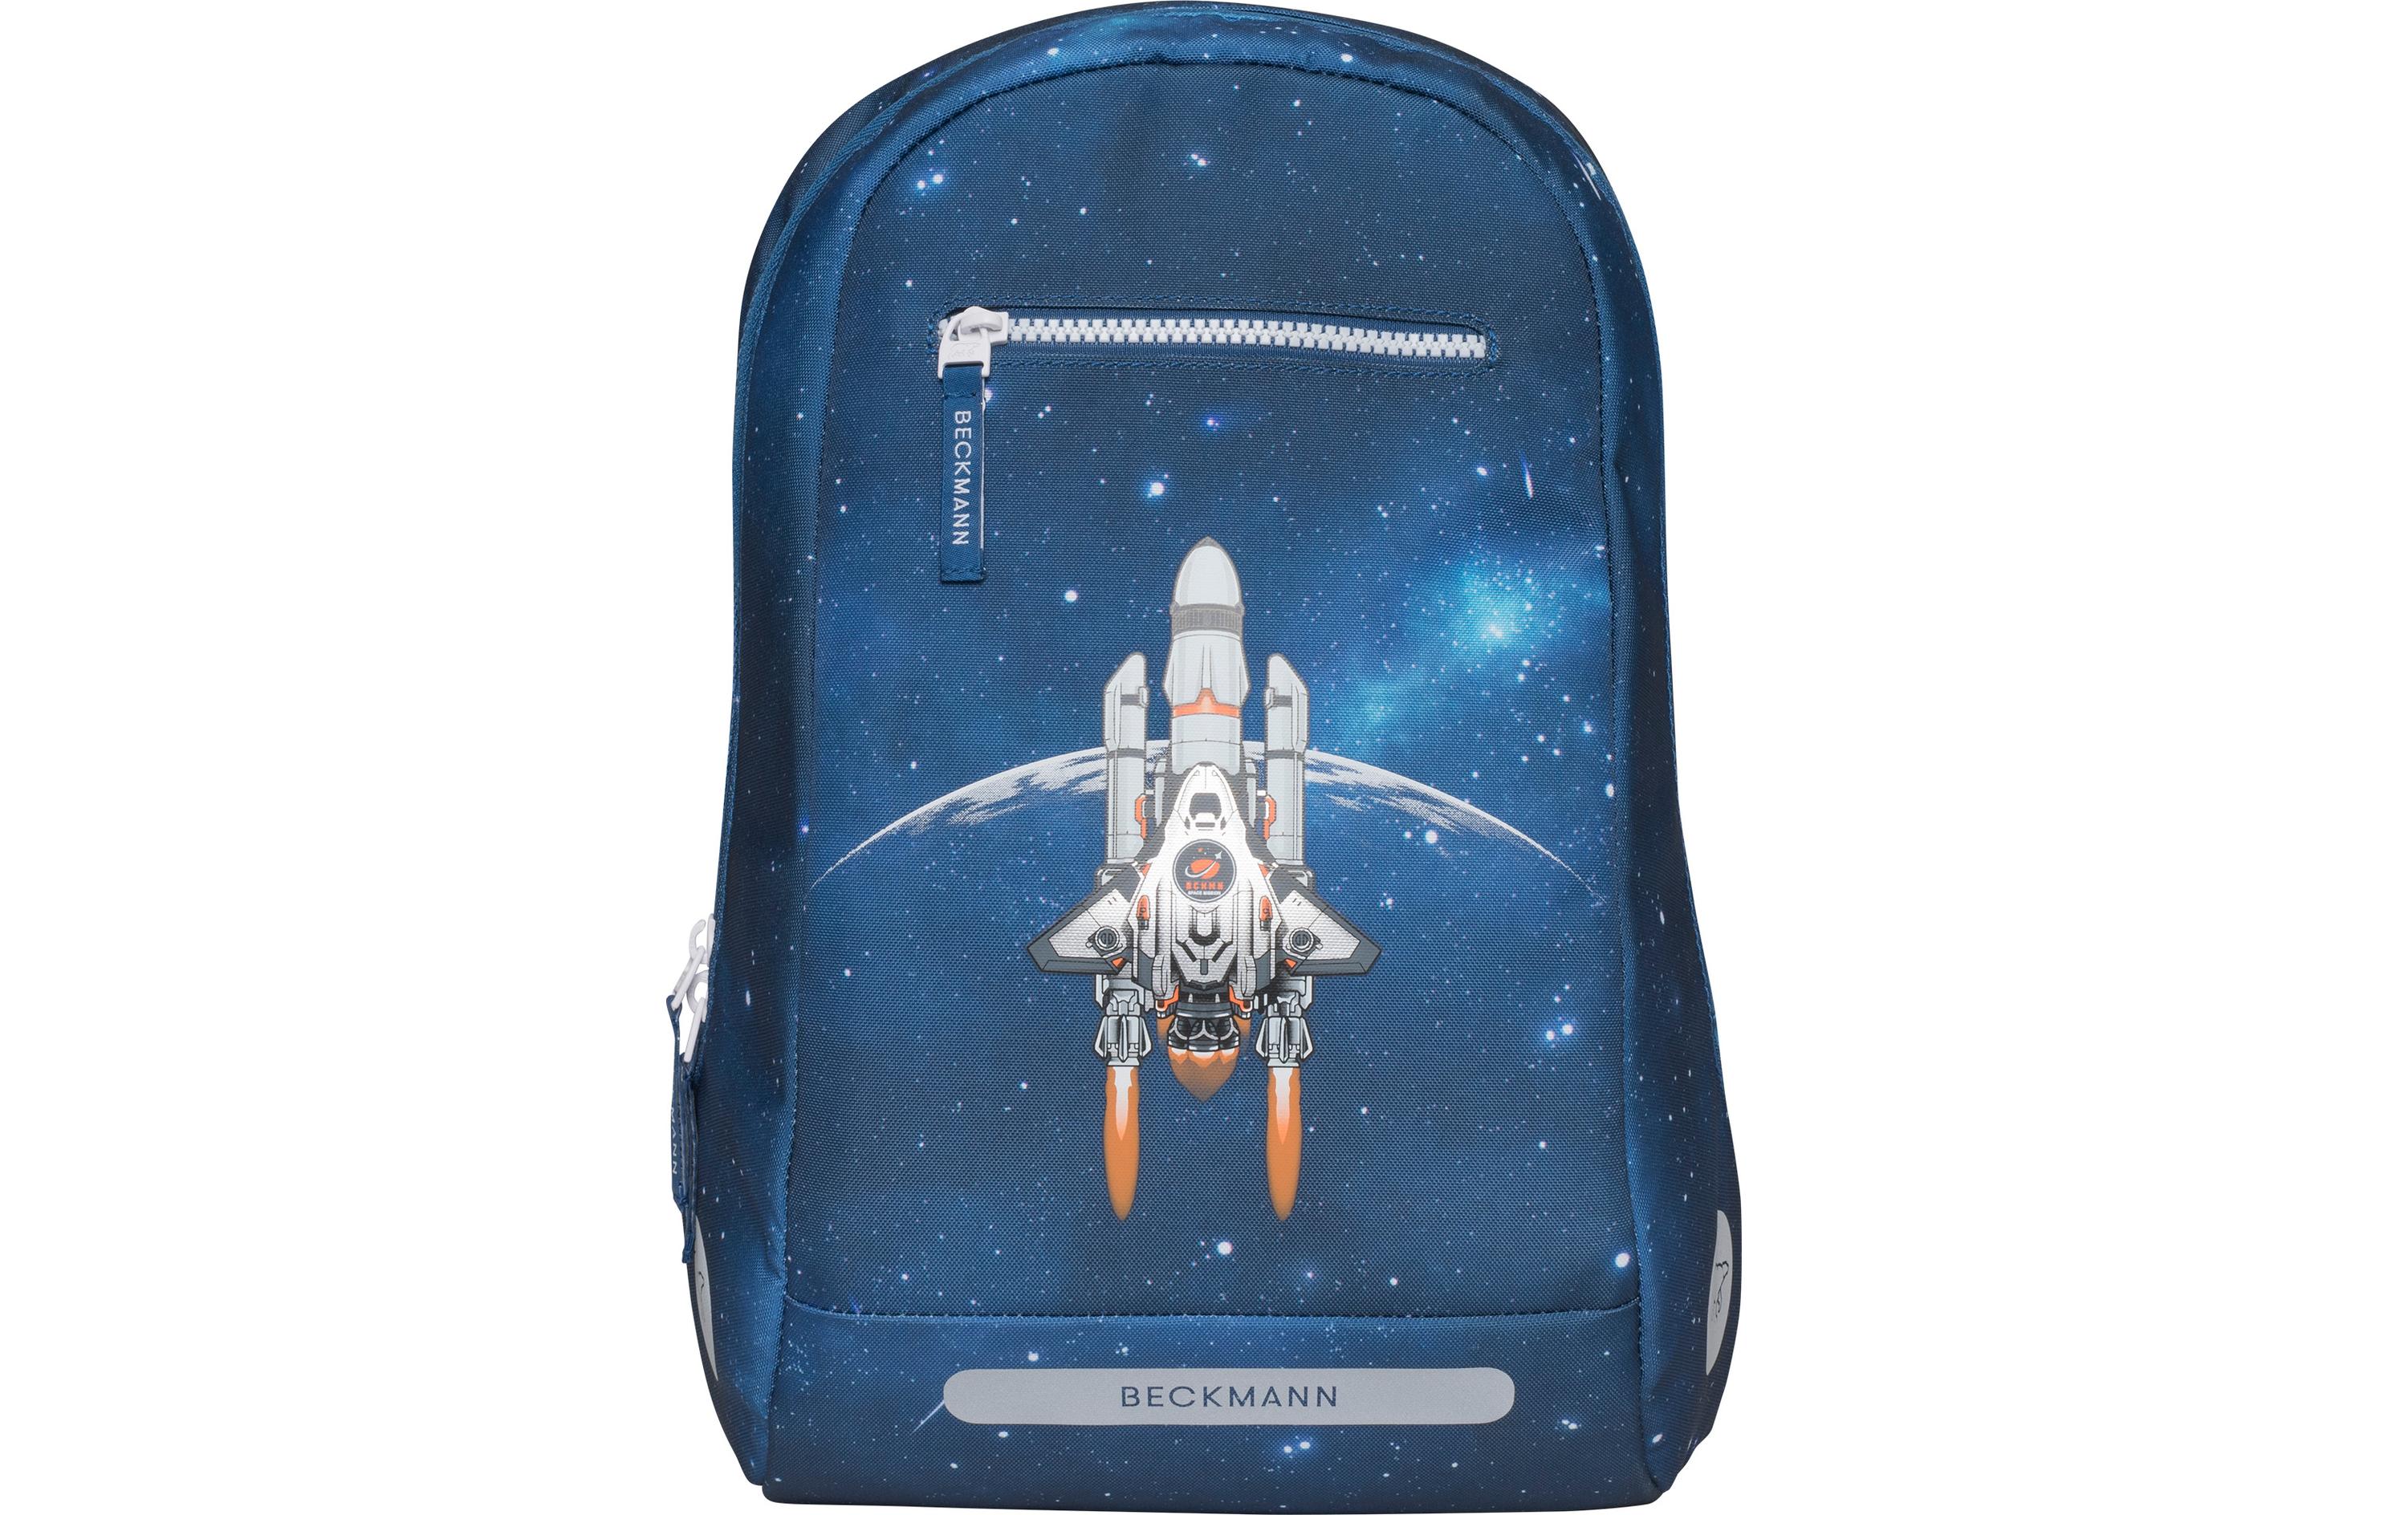 Beckmann Turnsack Classic Space Mission